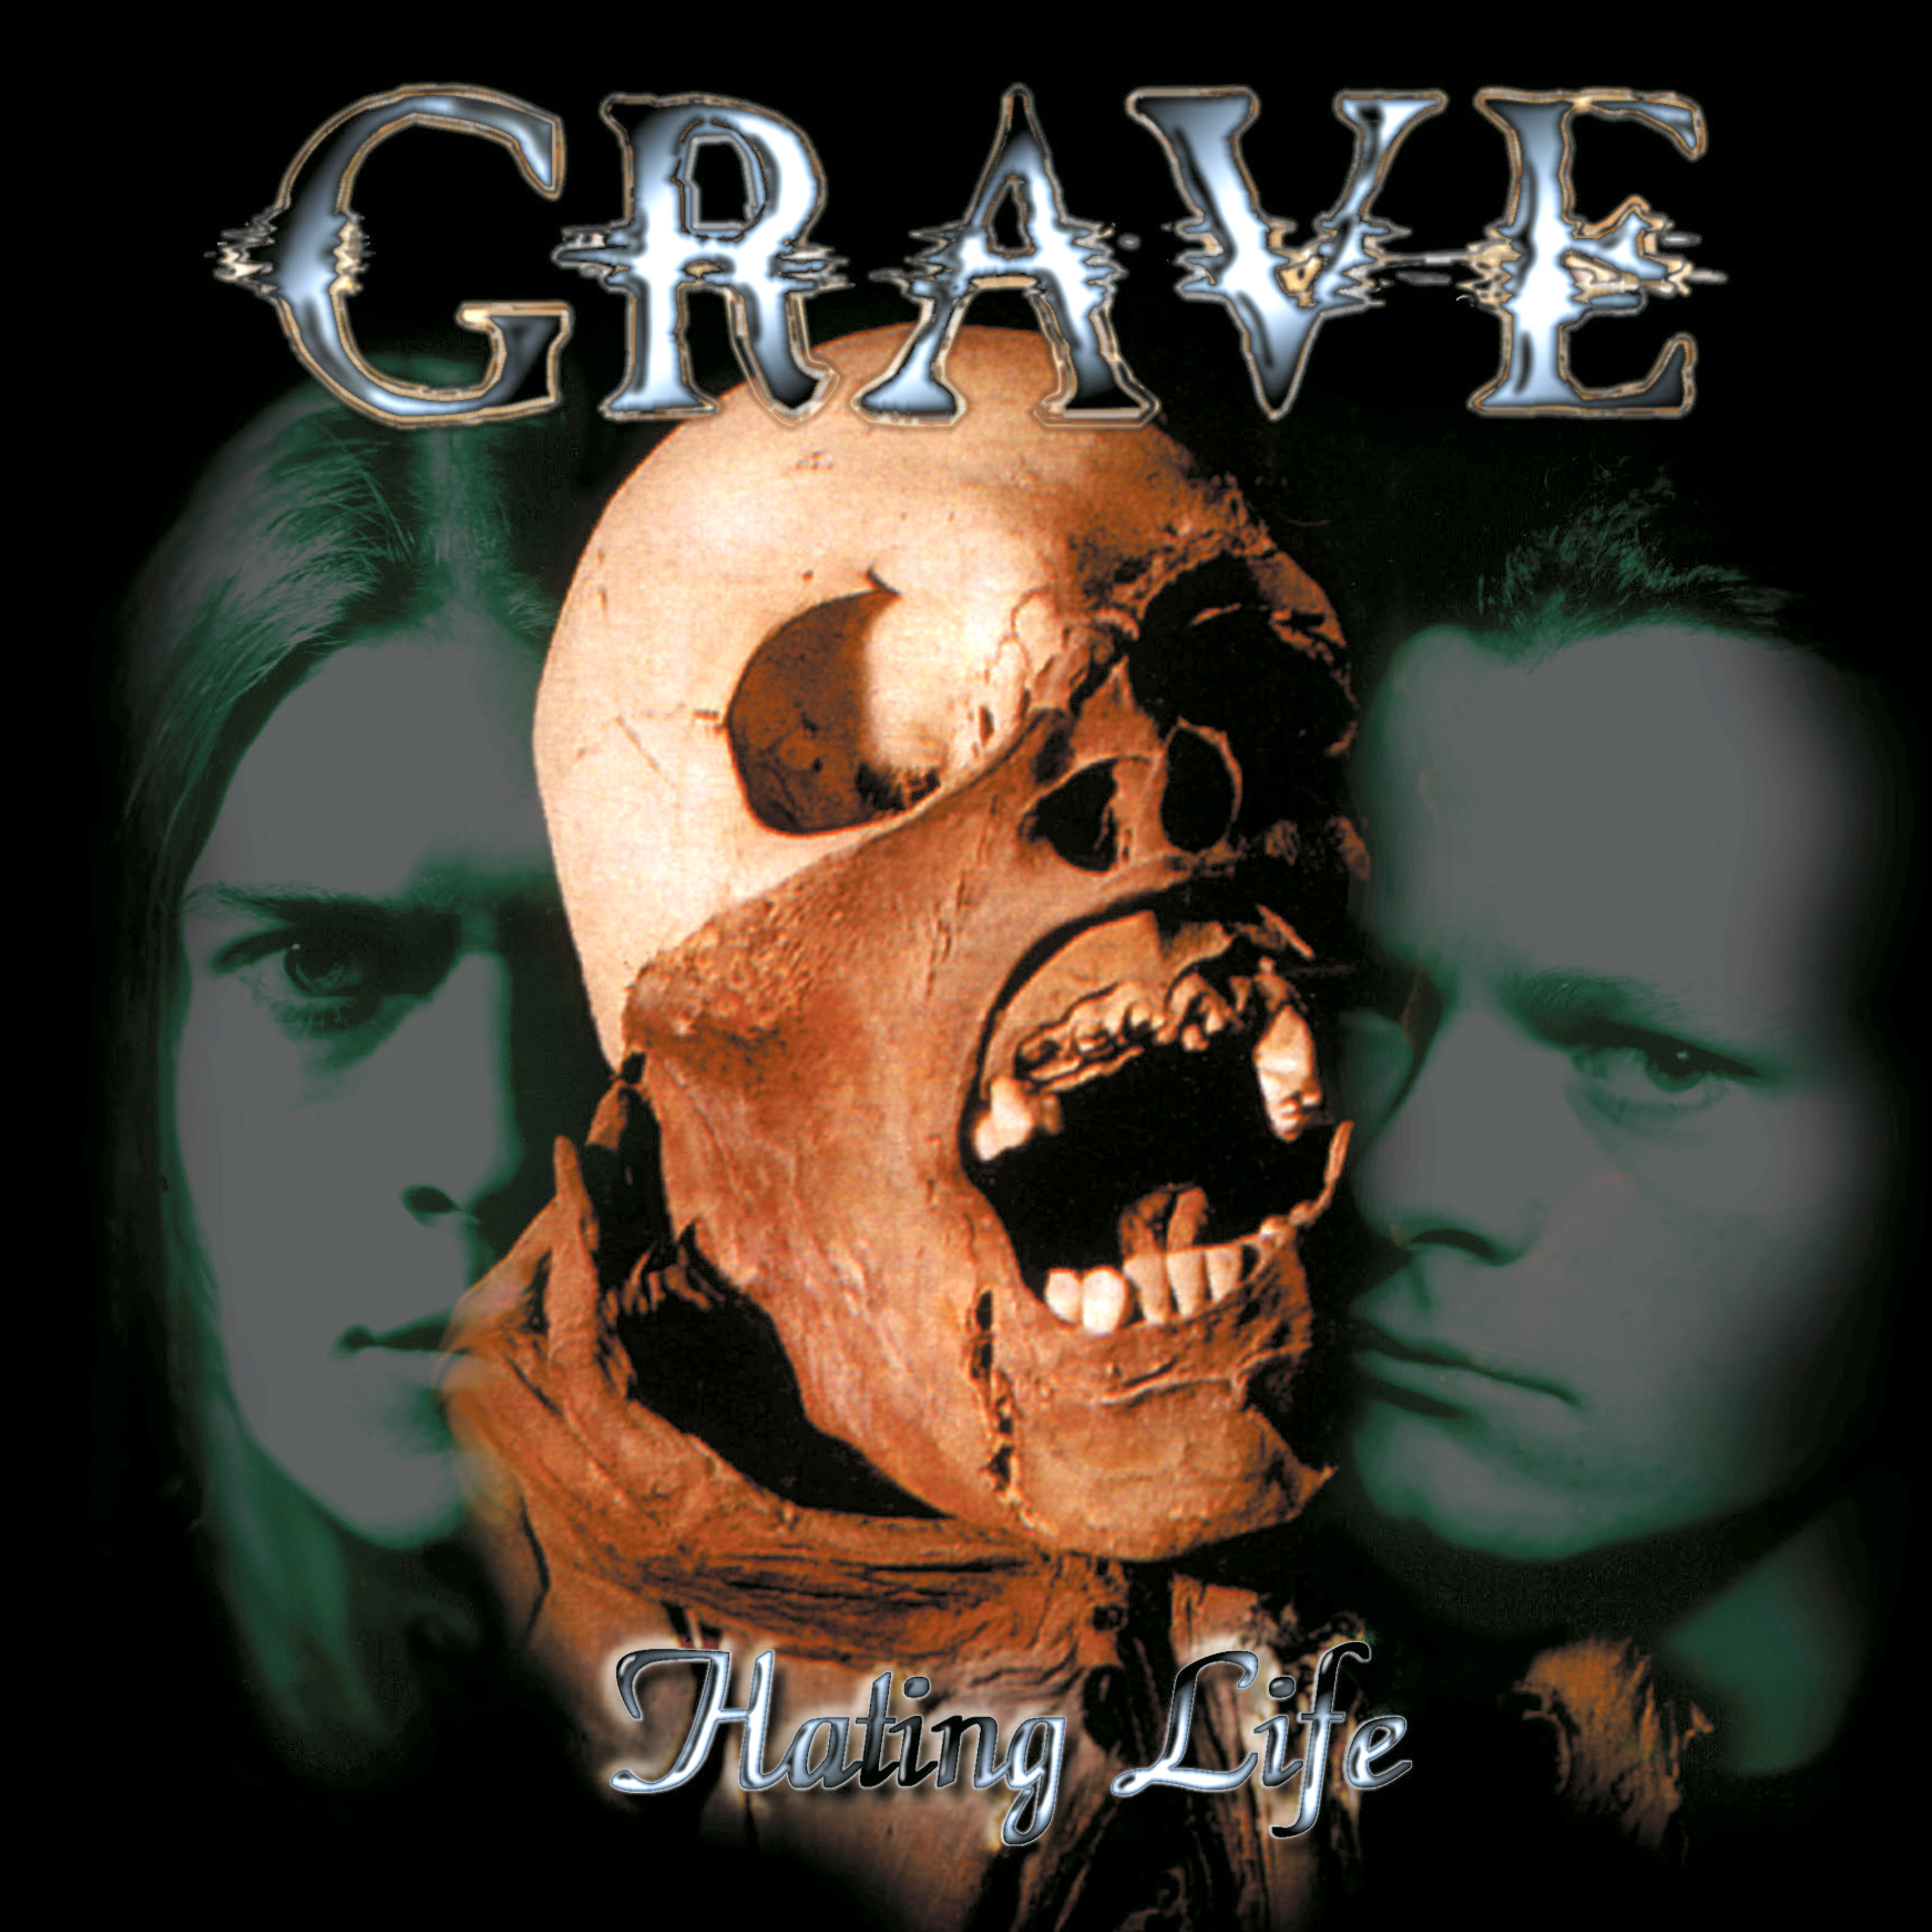 Grave - "Hating Life" (re-released)